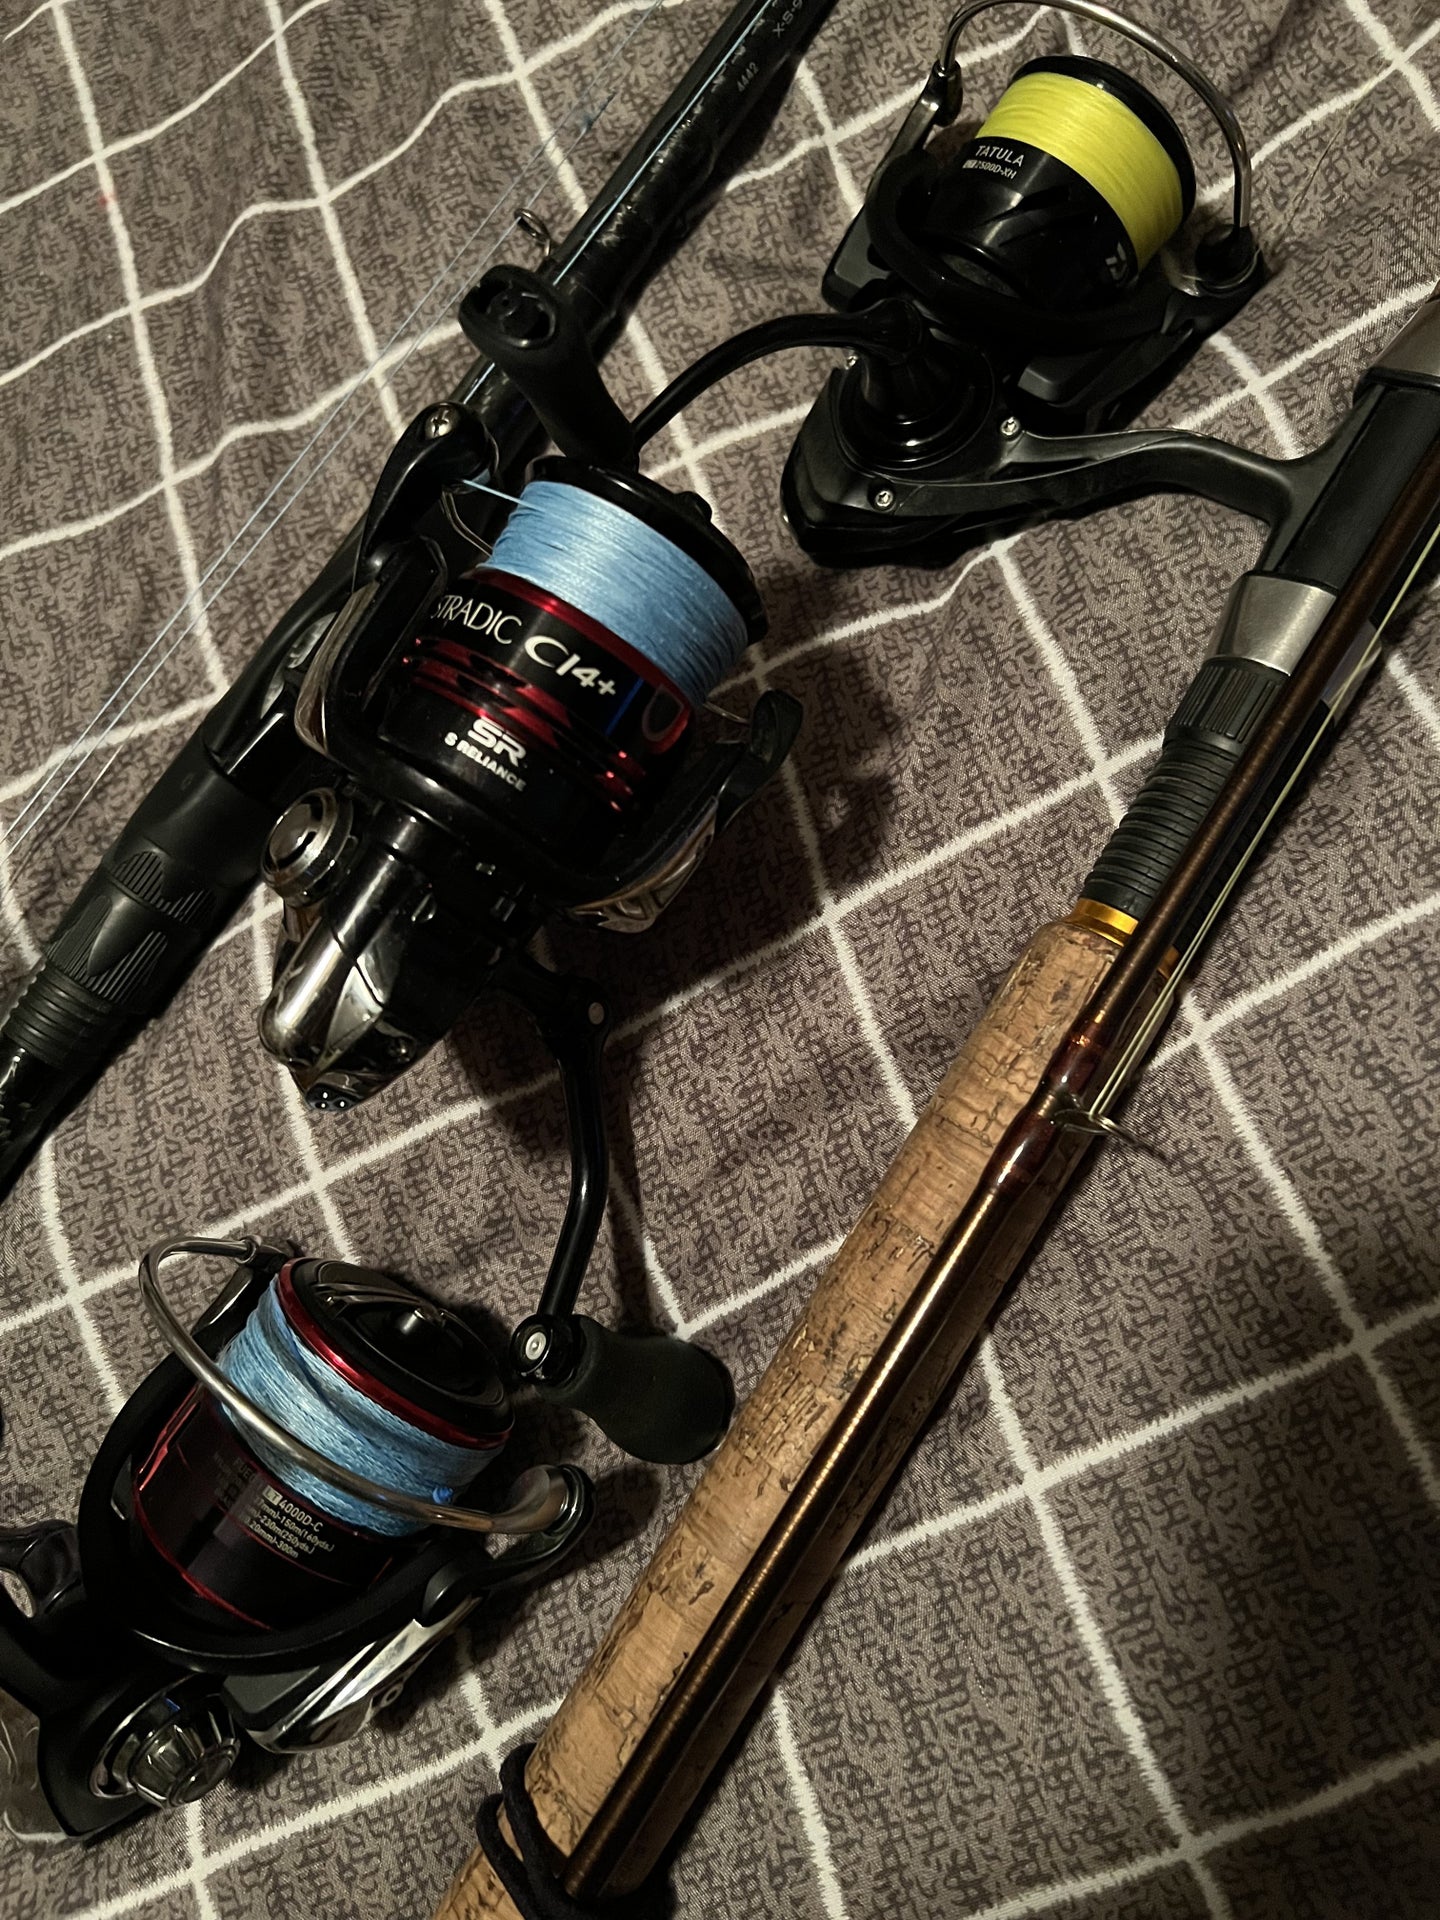 Shimano spinning reels or 2 questions